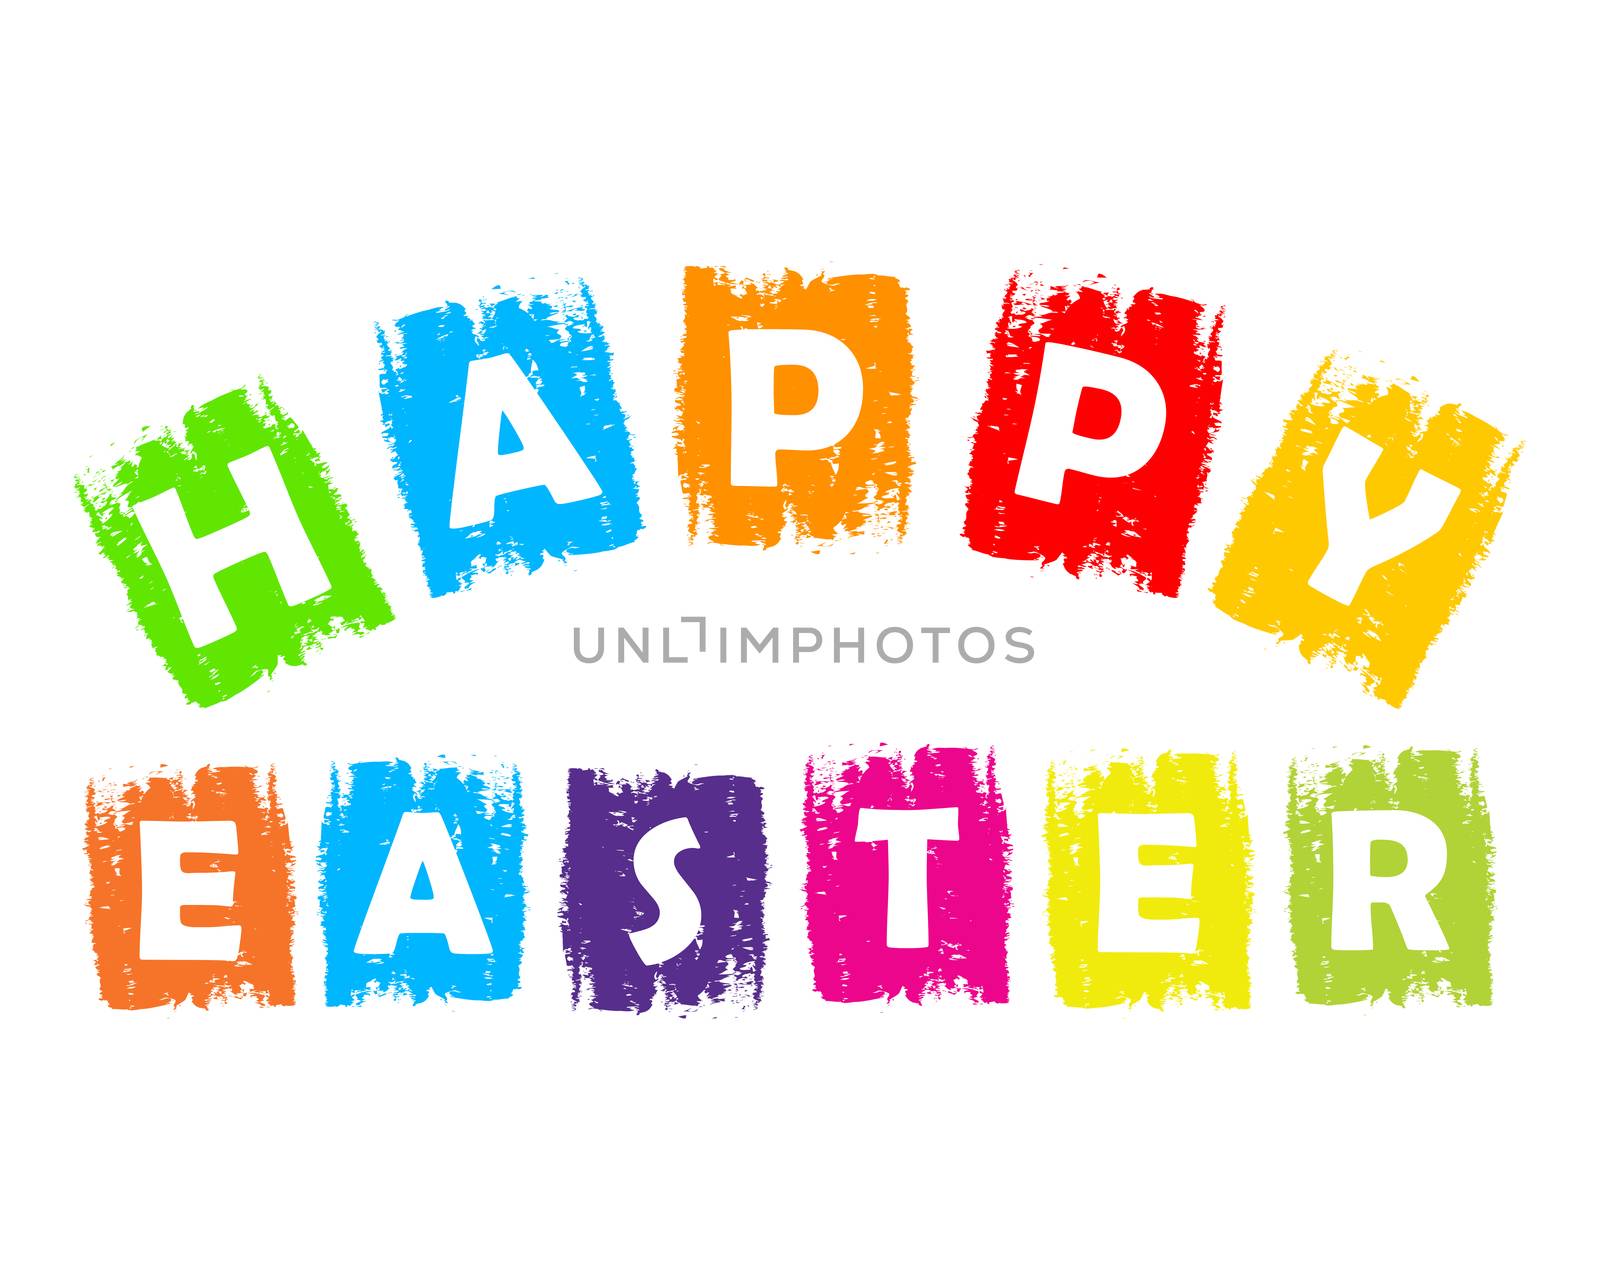 Happy Easter text in colorful drawn labels, holiday seasonal concept, flat design banners